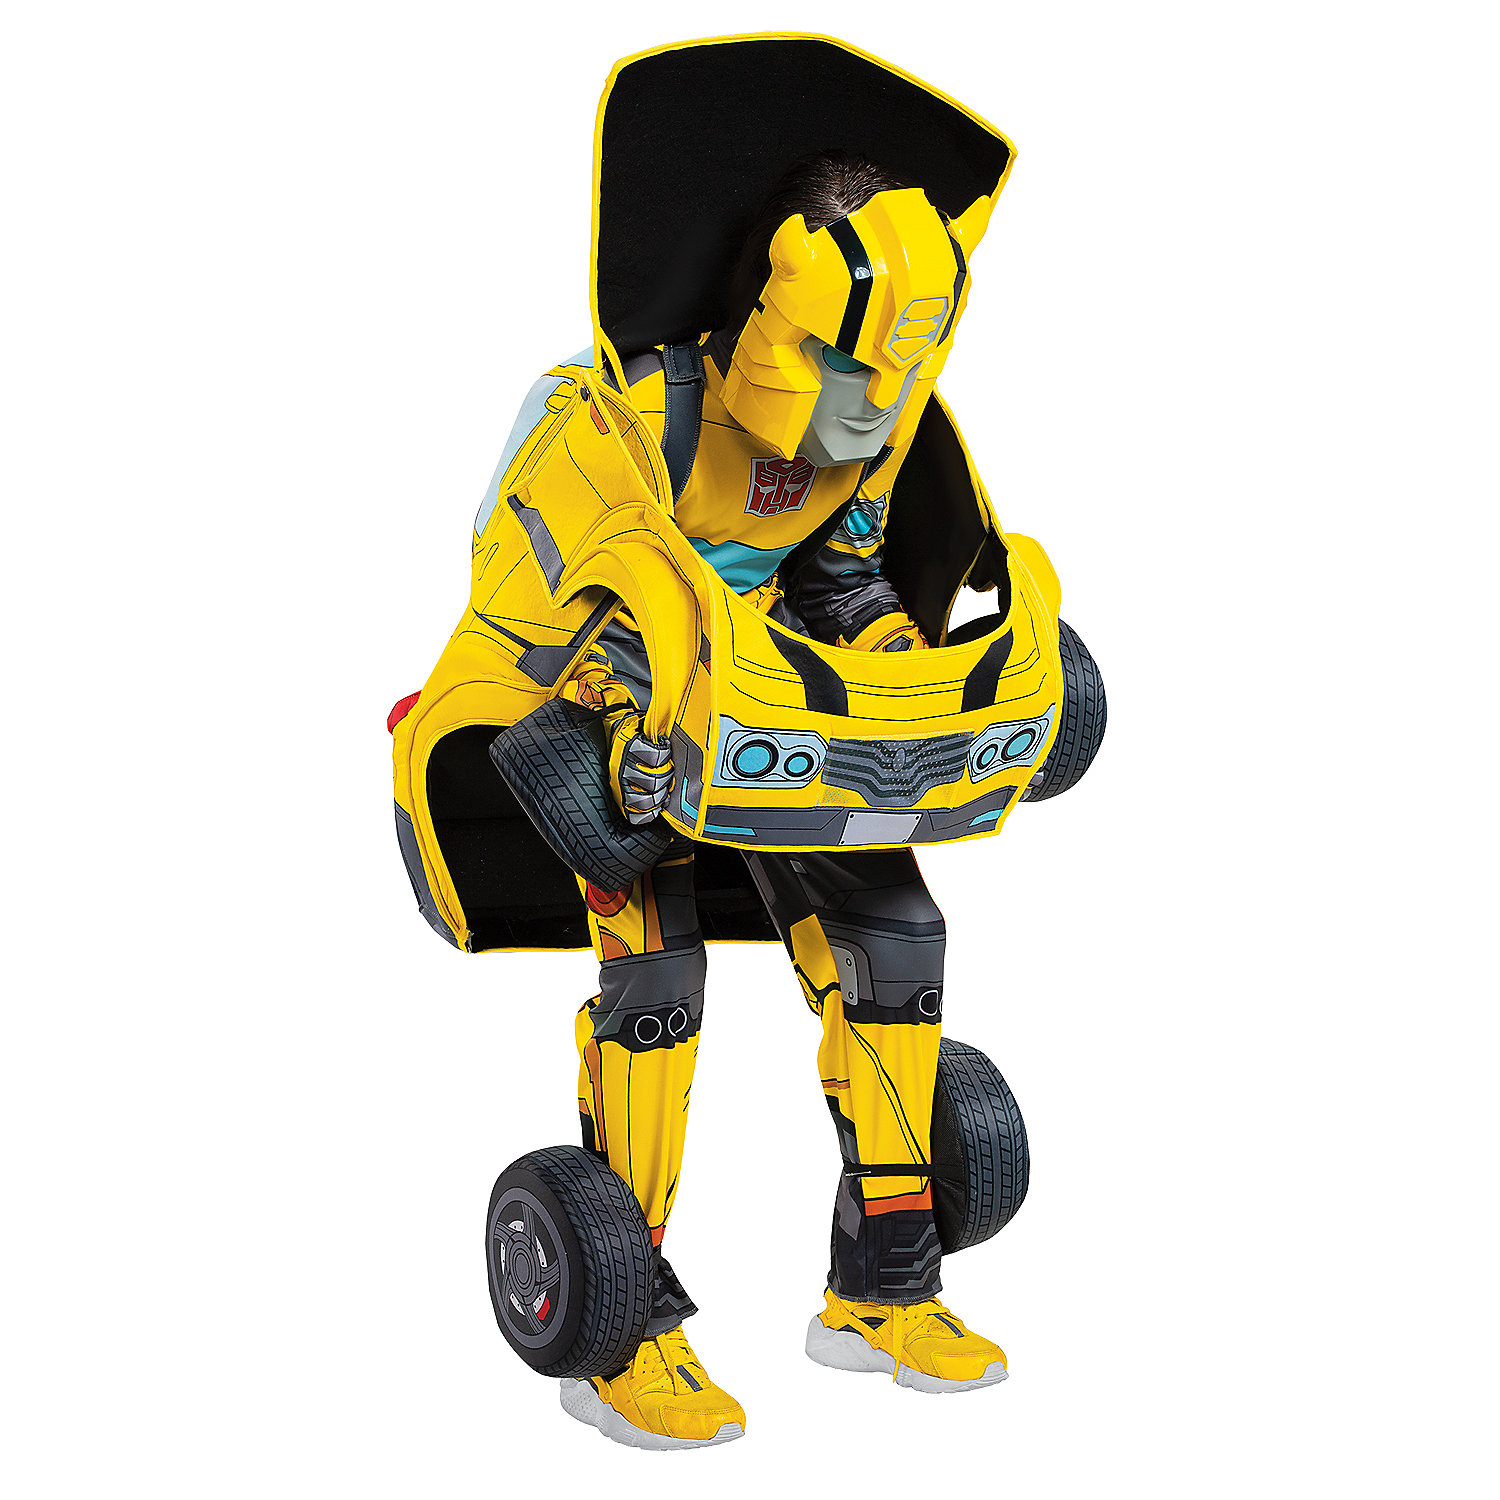 Disguise Bumblebee Converting Men's Halloween Fancy-Dress Costume for Adult, M - image 3 of 3